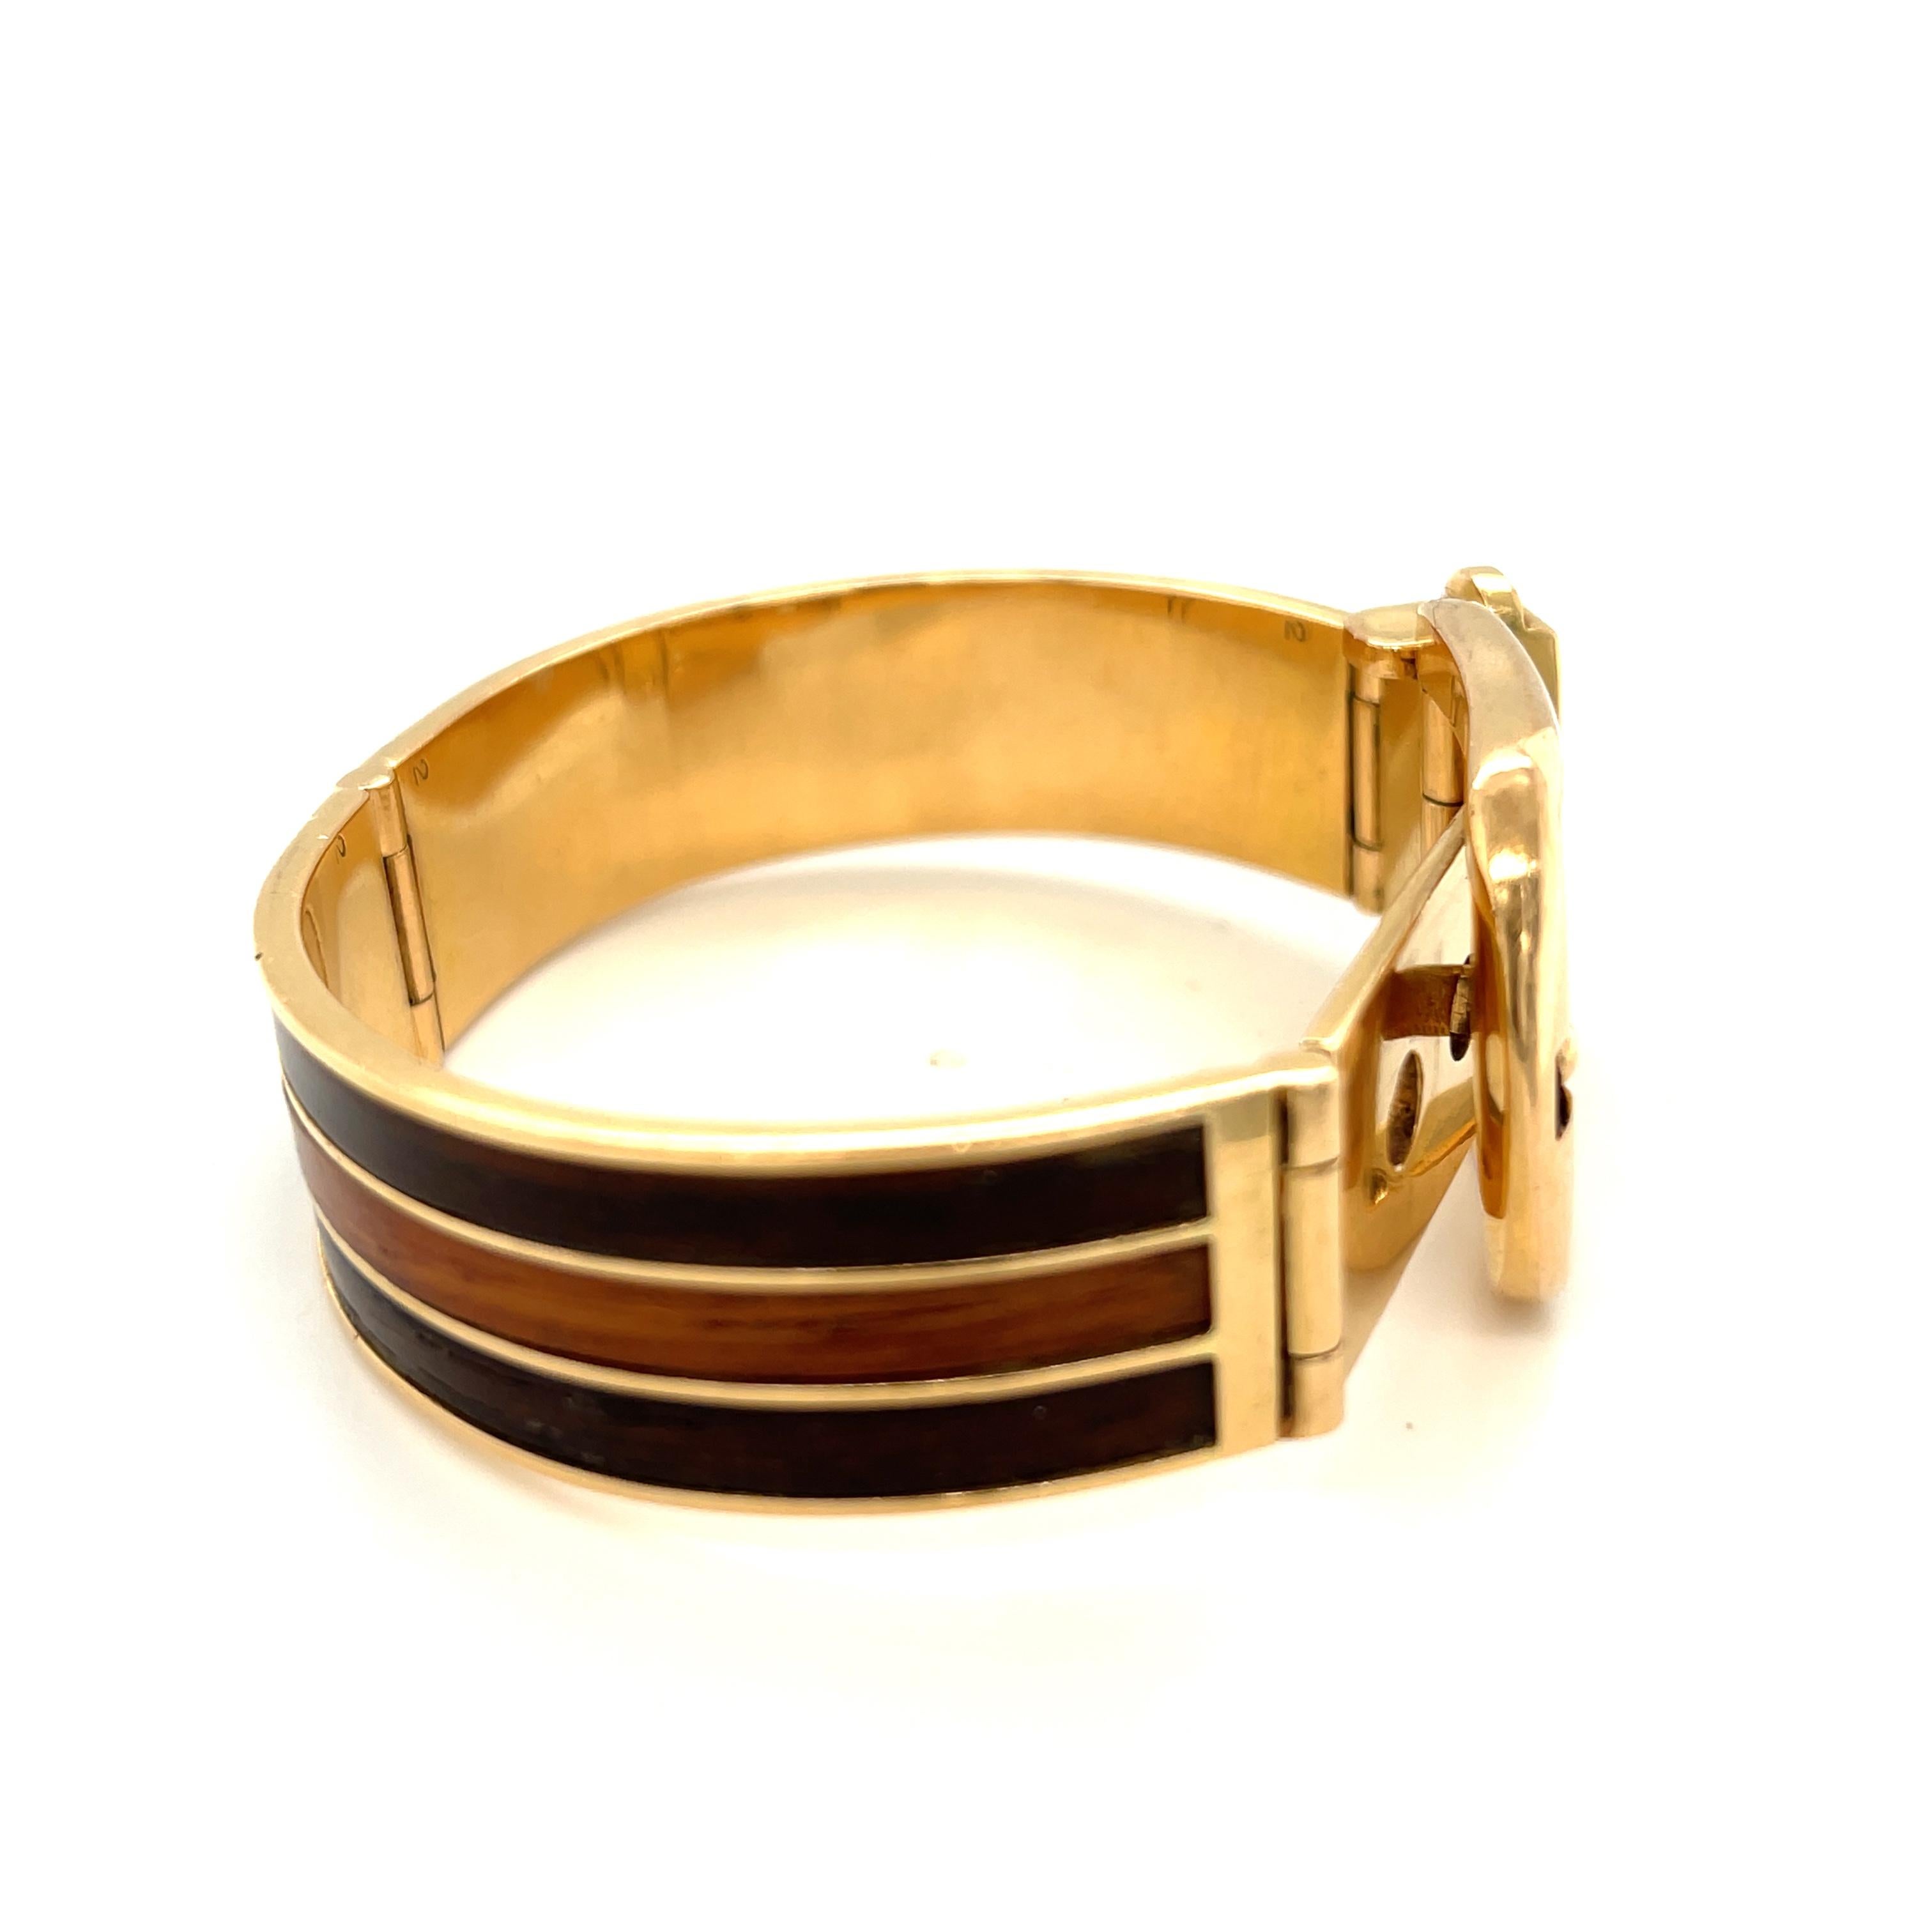 An iconic vintage 18k yellow gold and wood buckle bracelet by Gucci. This bracelet was likely made in the 1970s. The bracelet cleverly opens like a buckle and has two stations. The bracelet is iconic of Gucci’s bold hardware and aesthetic. The wood